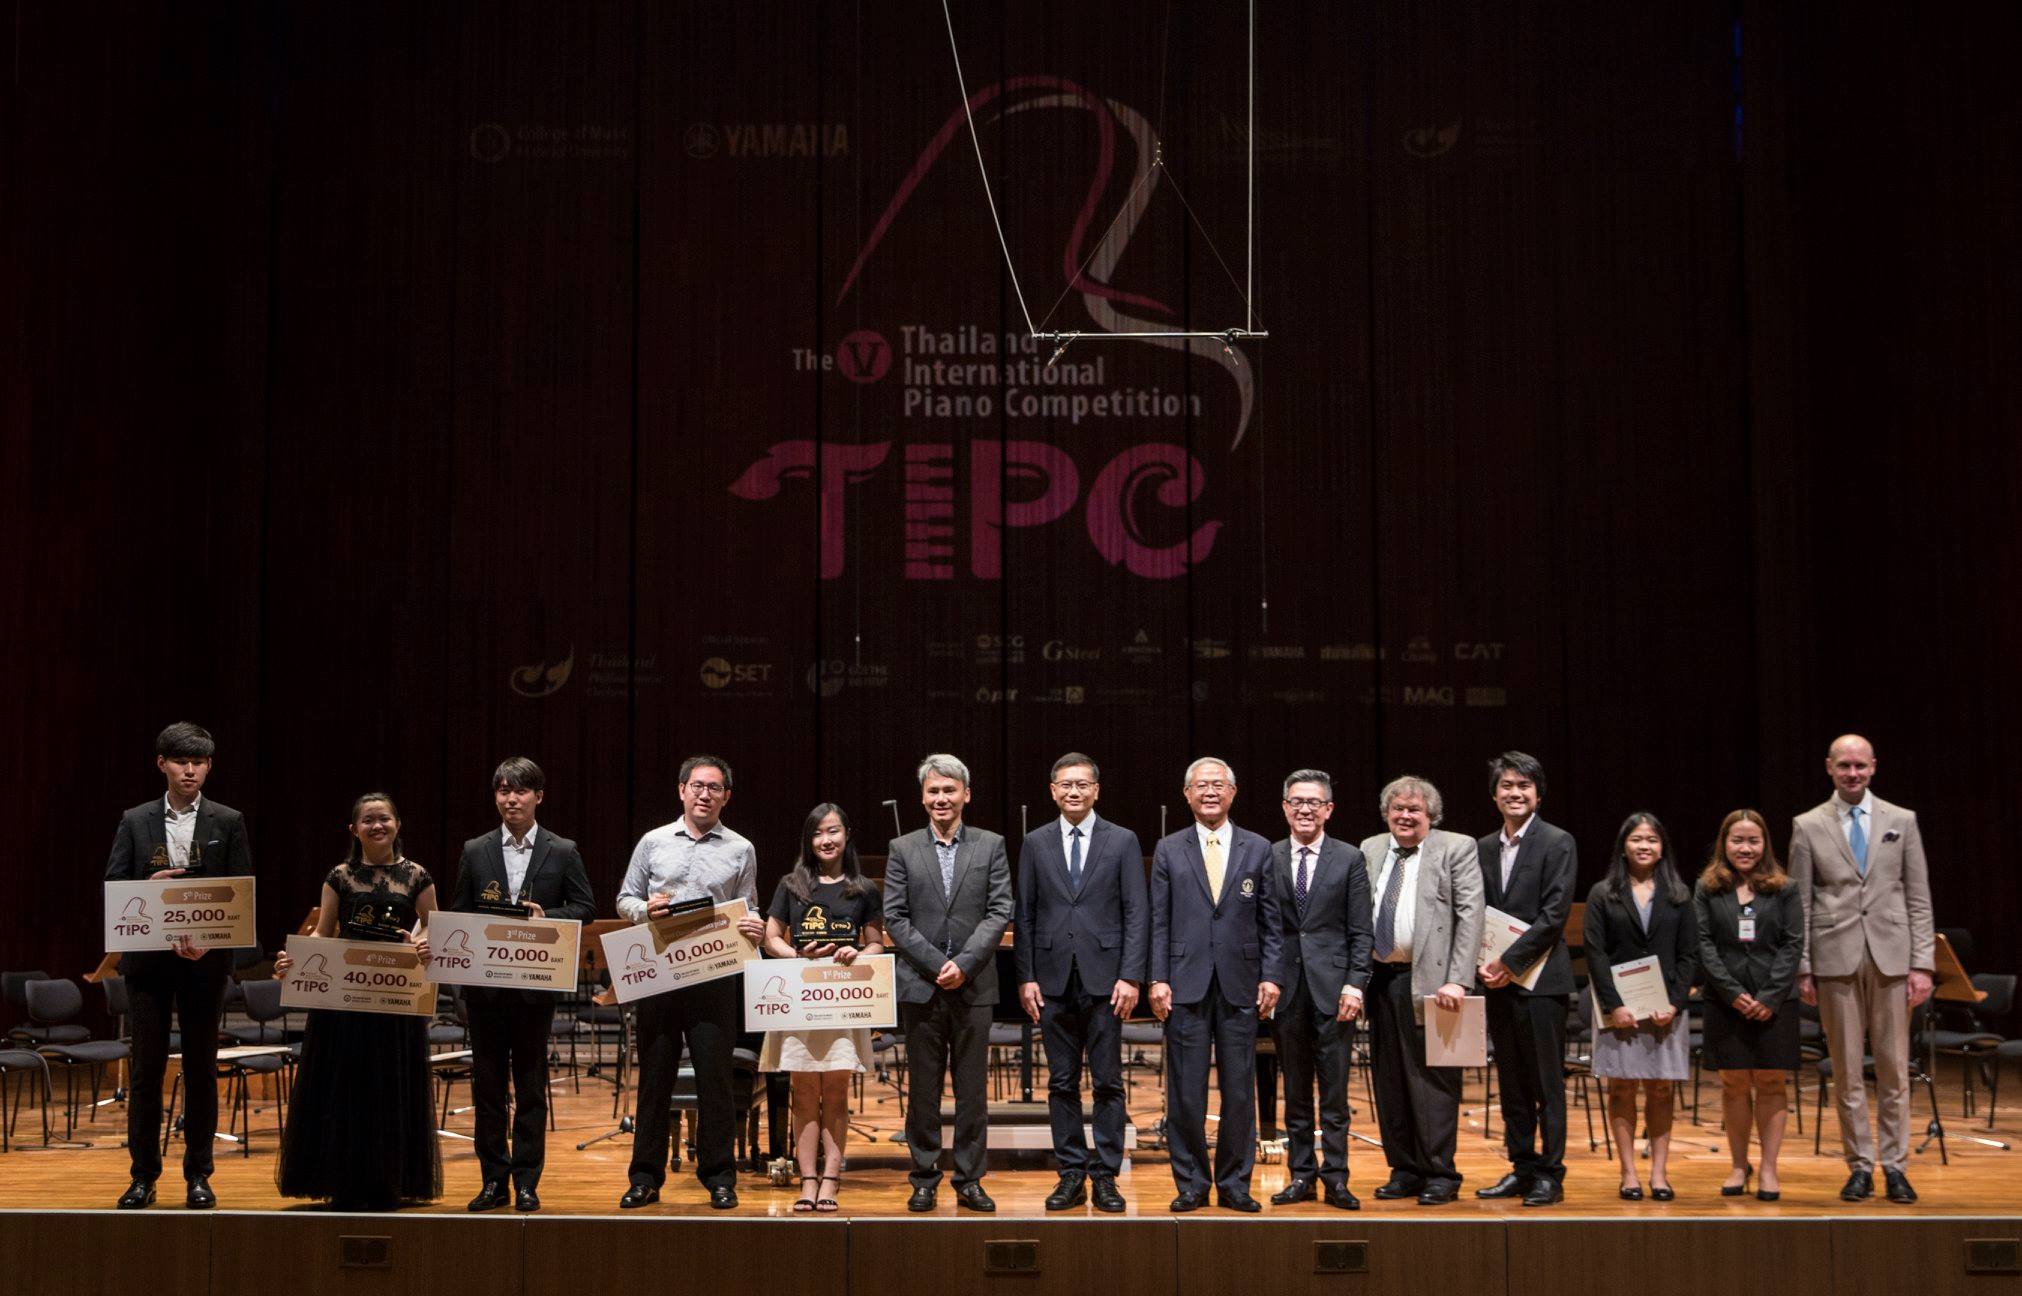 Group of winners on stage at V Thailand Piano Competition